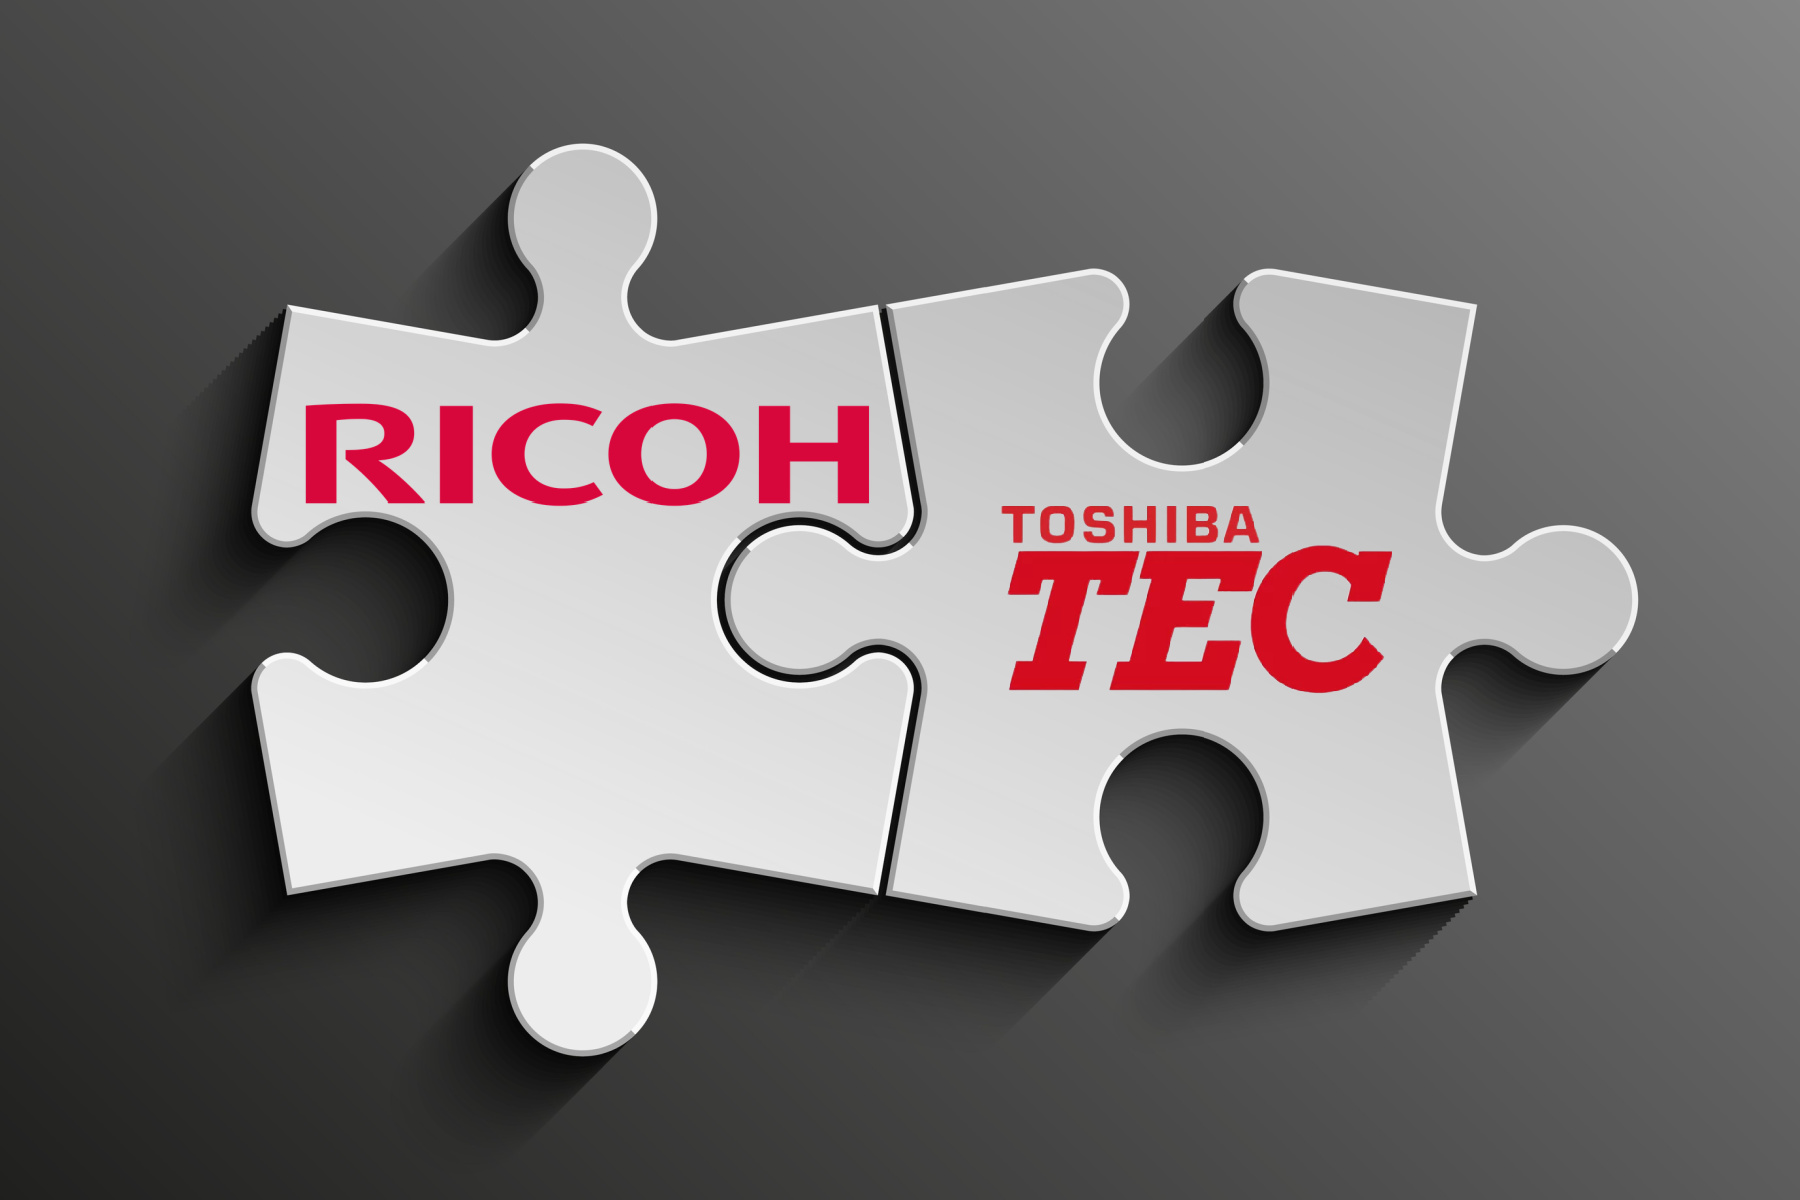 Ricoh and Toshiba Tec Confirm Business Partnership to Manufacture MFPs | Actionable Intelligence